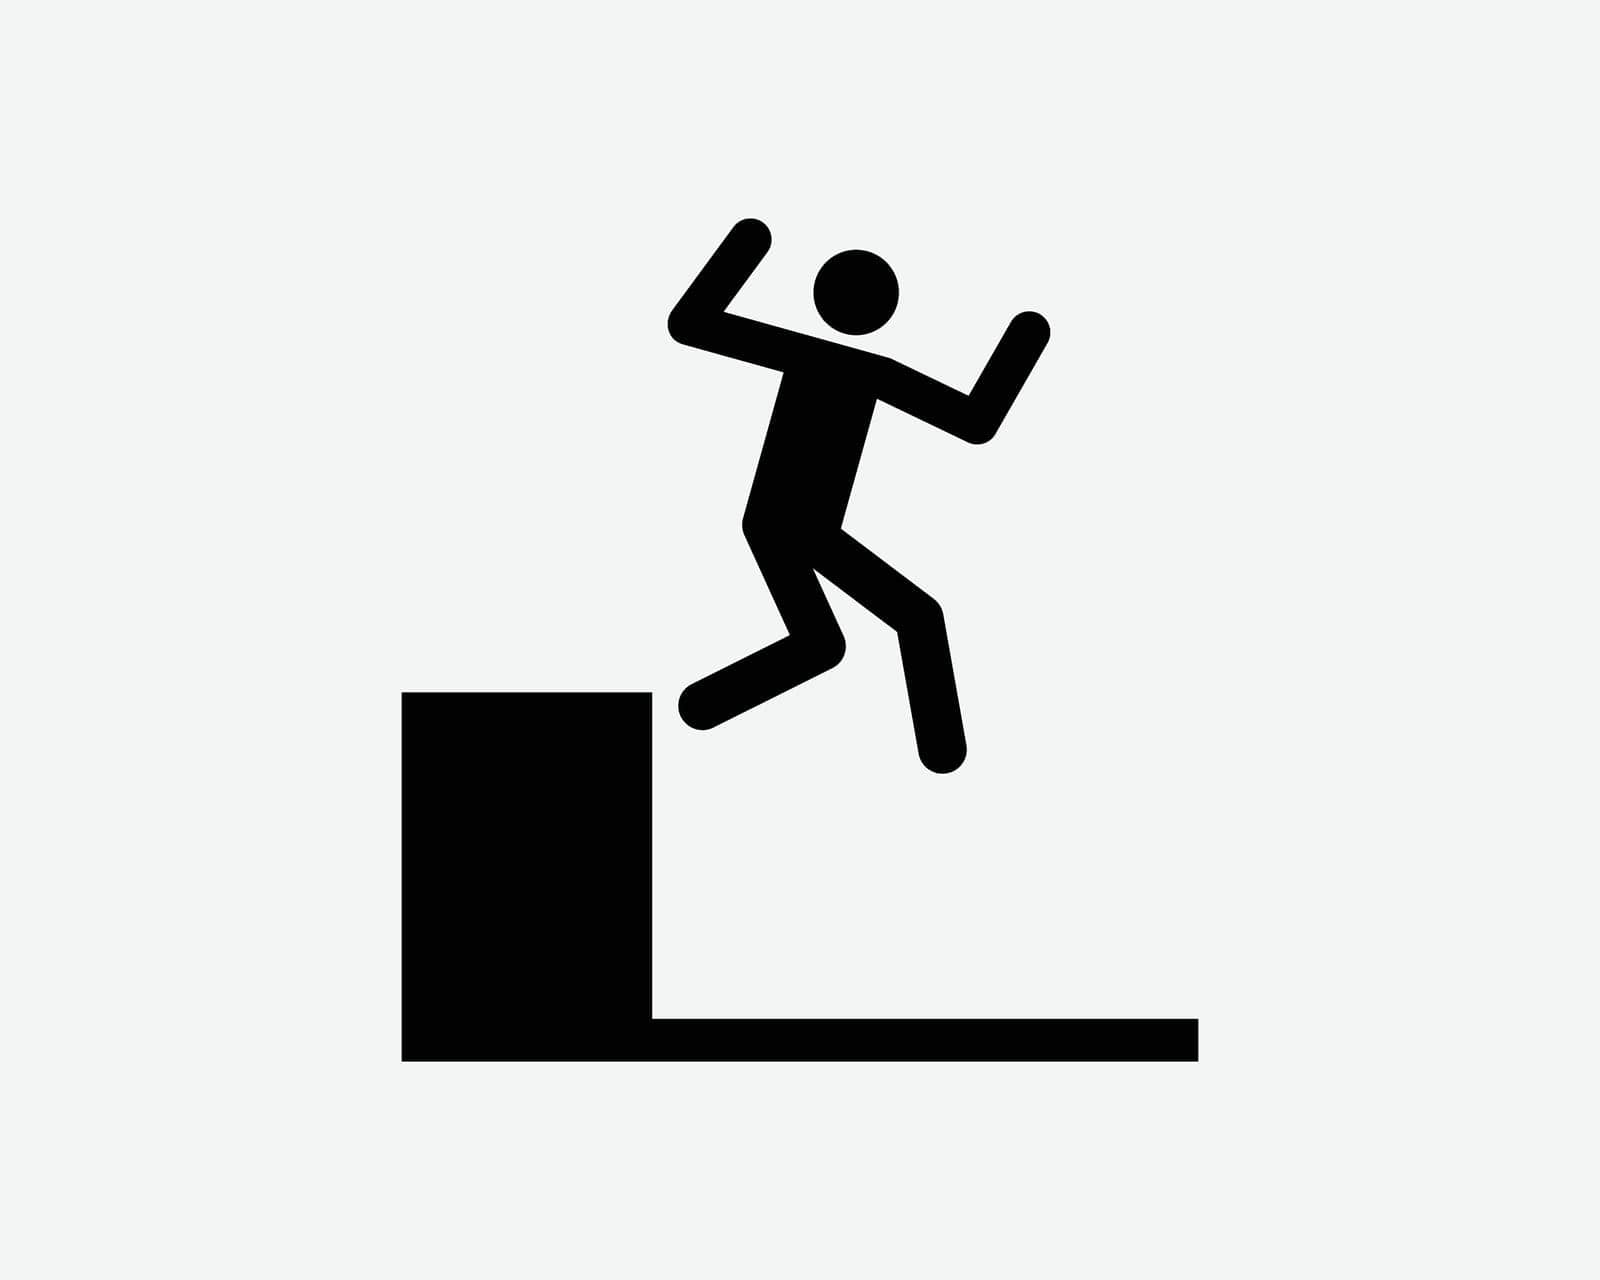 Jumping Down Icon Man Jump Leap Fall Cliff High Ground Suicide Vector Black White Silhouette Symbol Sign Graphic Clipart Artwork Illustration Pictogram